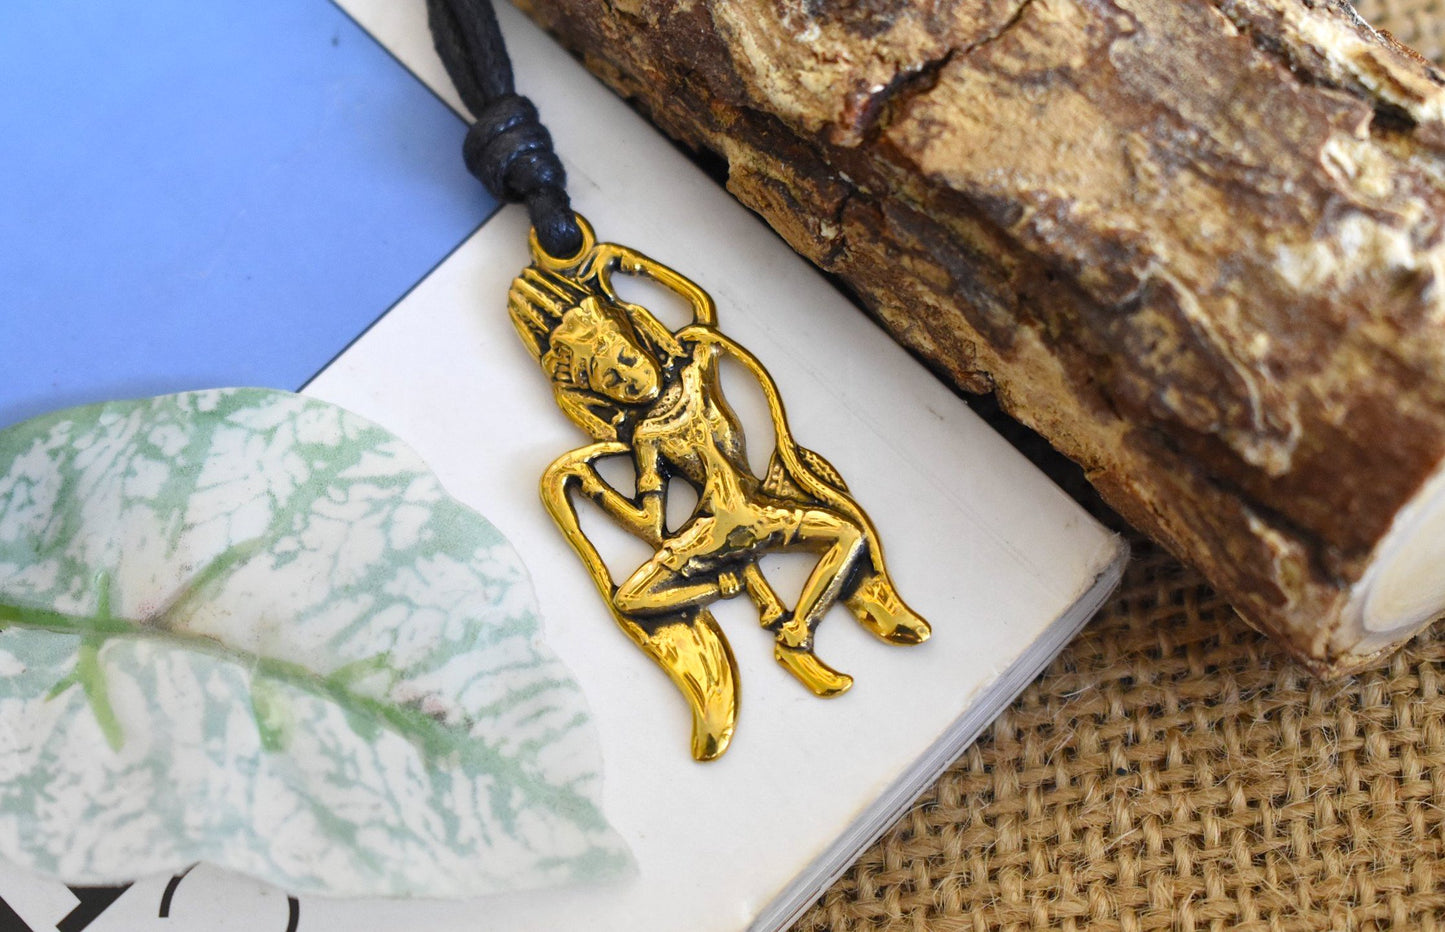 Apsara - A Cultural Tribute Jewelry Gold Brass Charm Necklace Pendant Jewelry